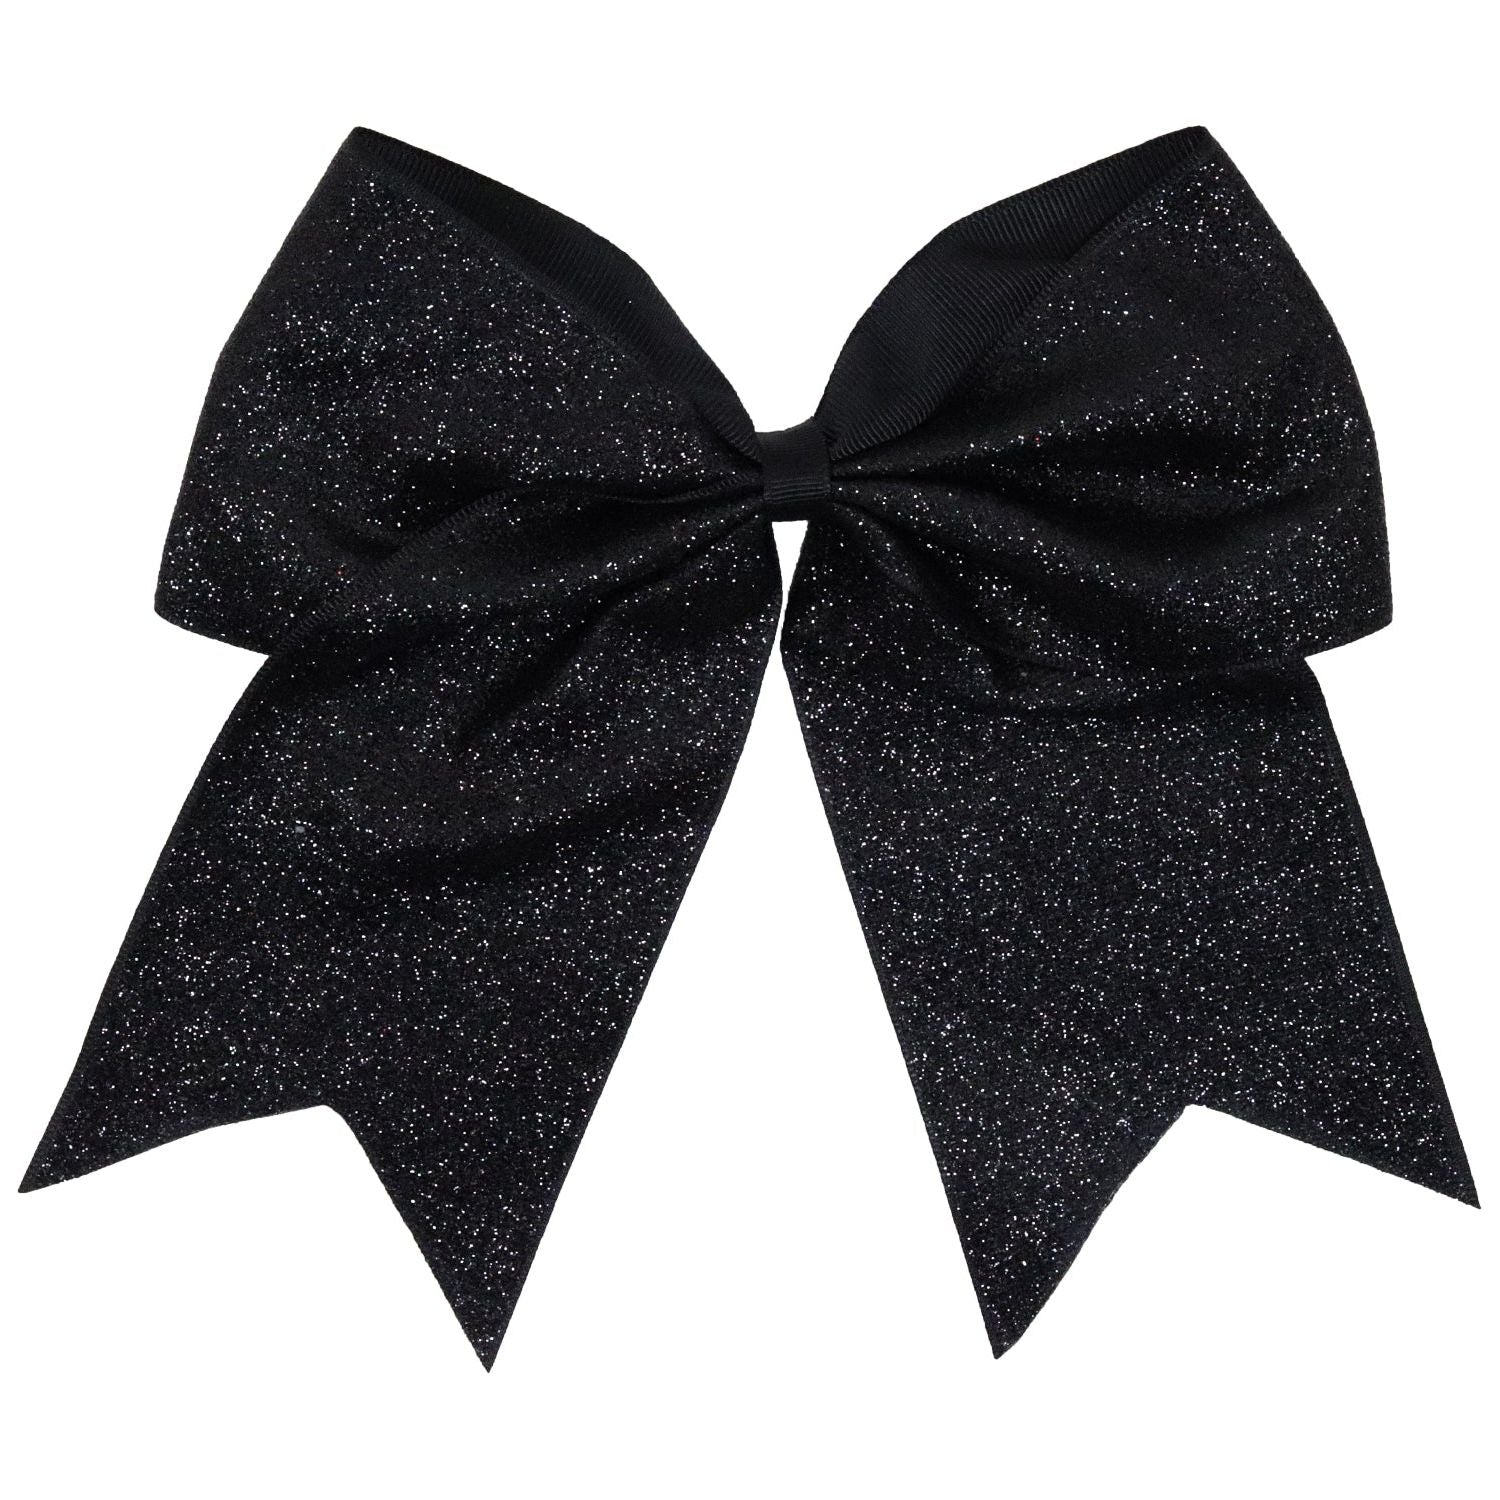 Kenz Laurenz Glitter Cheer Bows - Cheerleading Softball Gifts for Girls and Women Team Bow with Ponytail Holder Complete Your Cheerleader Outfit